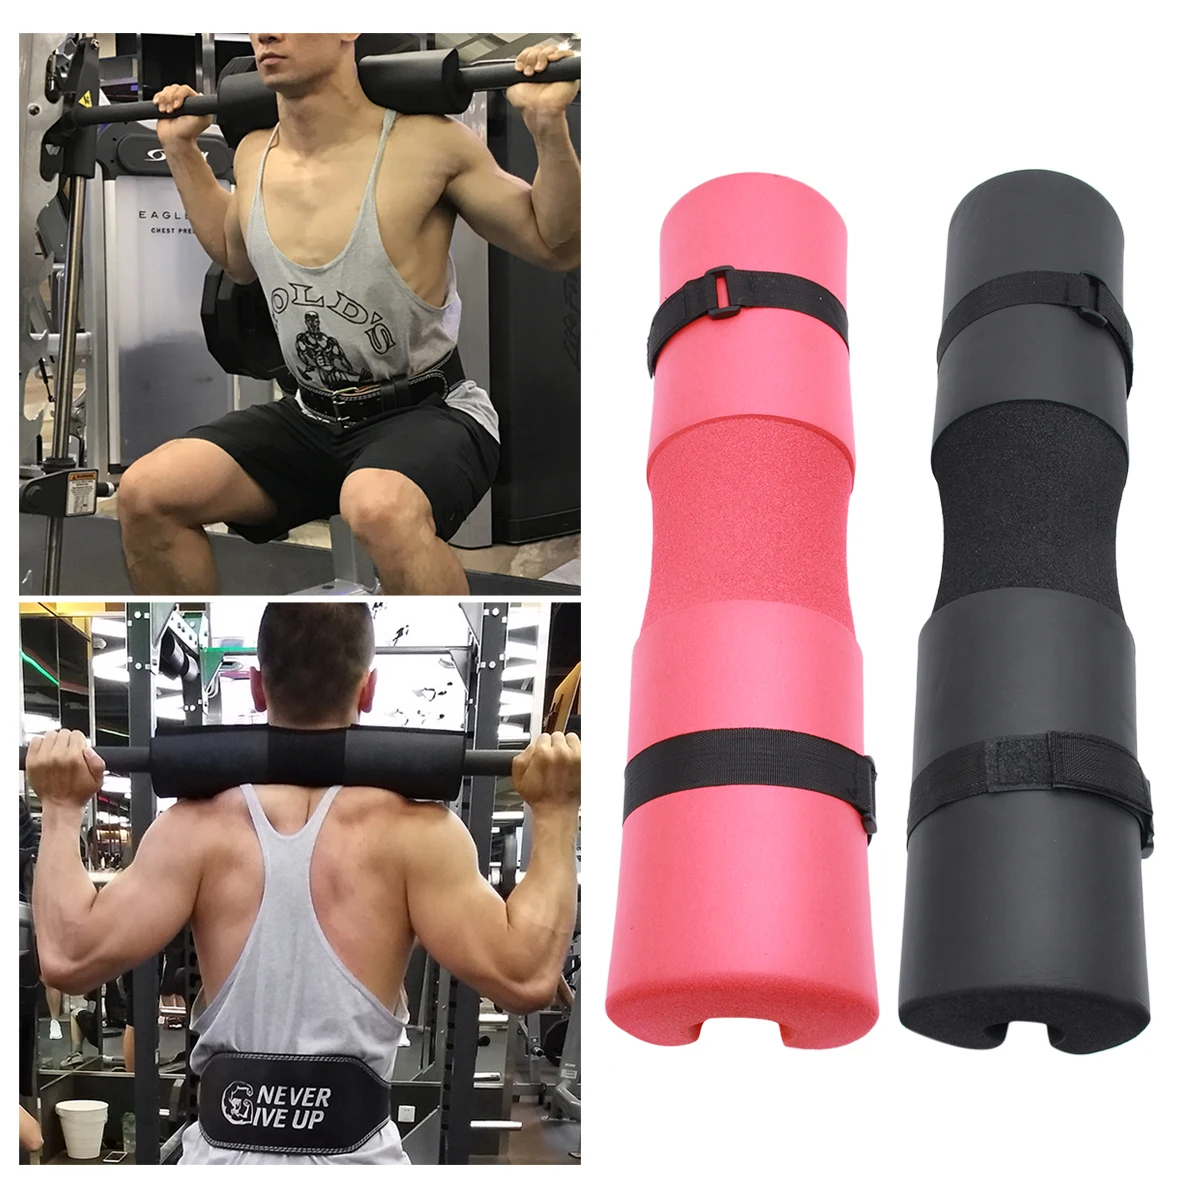 Neck Pad For Weightlifting Factory Sale, 57% OFF | www.museodeltaantico.com